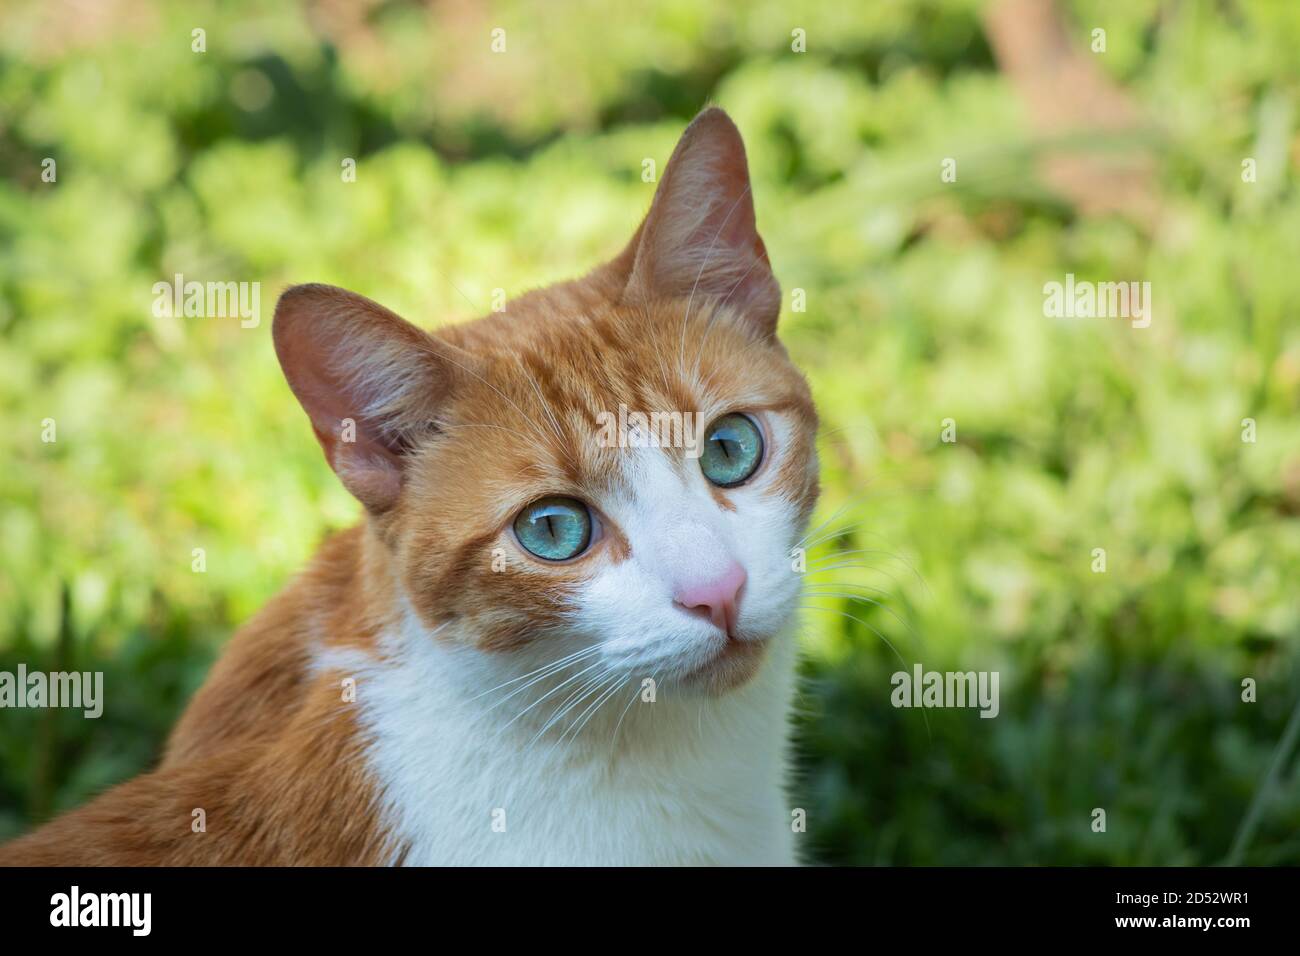 Mixed breed orange cat with green eyes staring Stock Photo